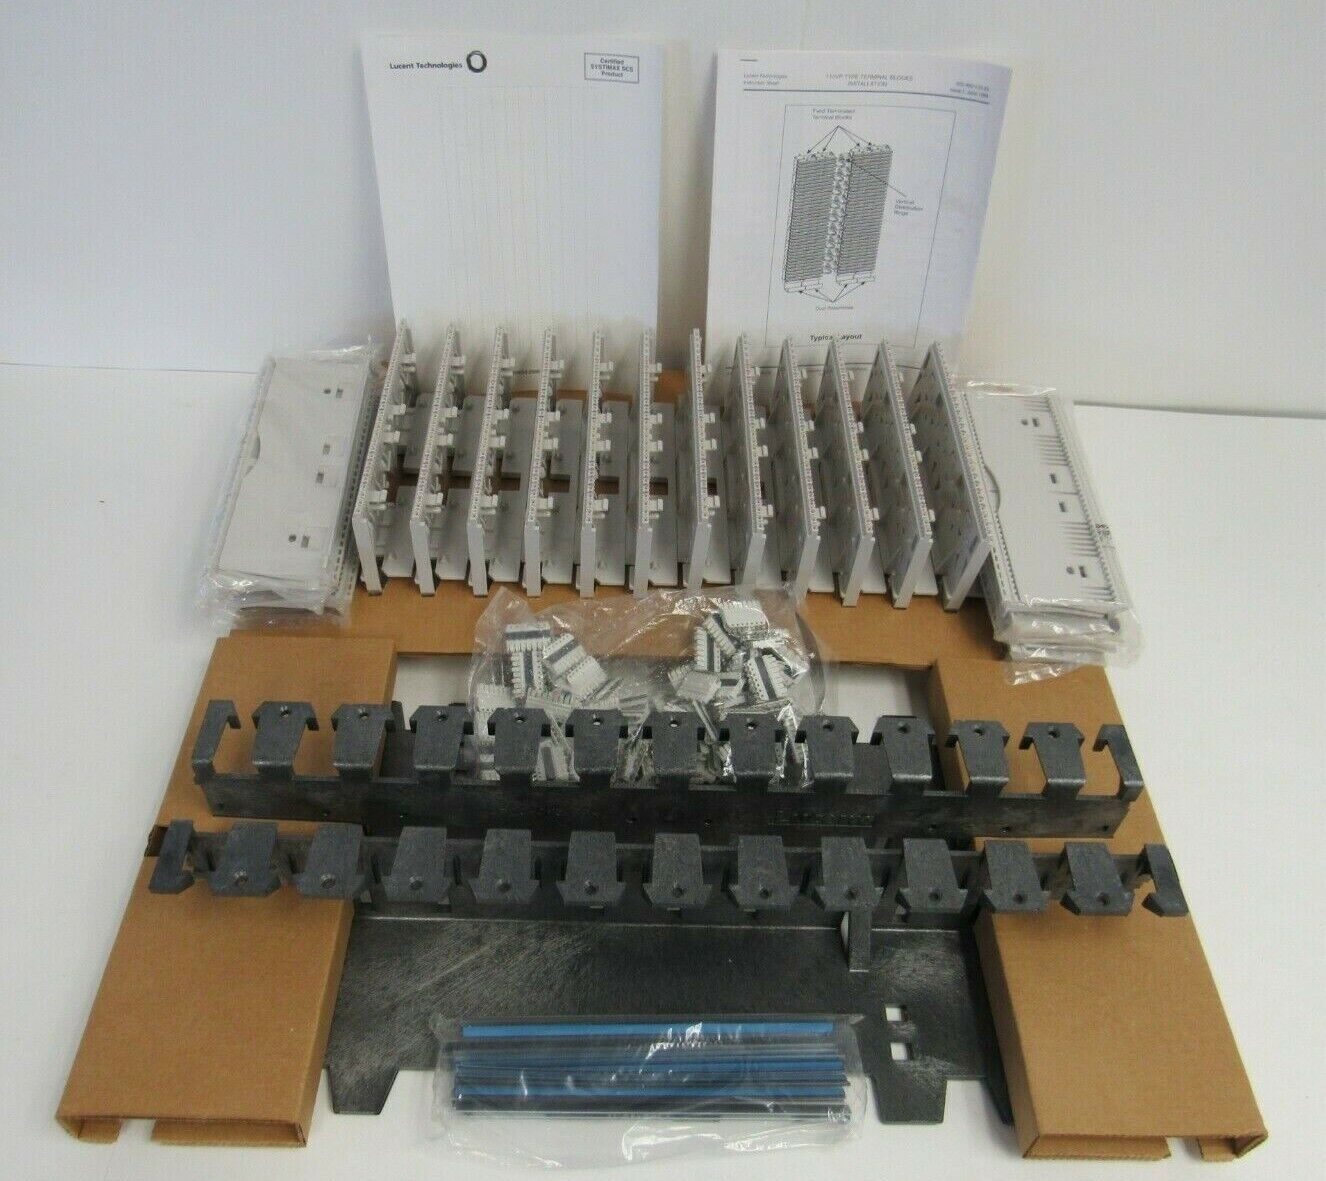 Lucent Technologies 108561143 Systimax SCS Gigaspeed 336 Patch Panel Kit 20-1